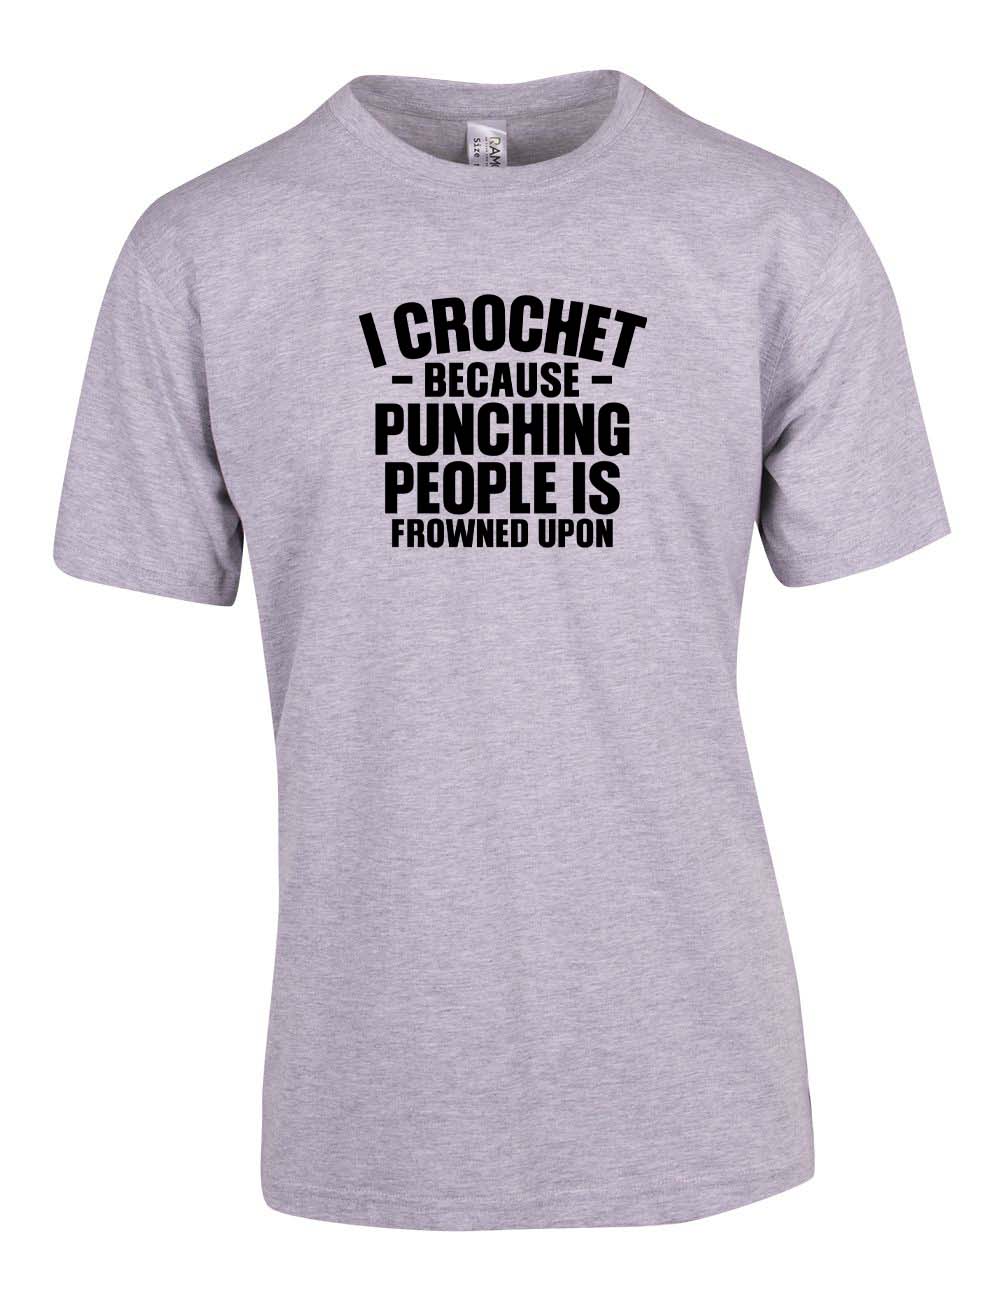 I Crochet because punching people is frowned upon T-Shirt